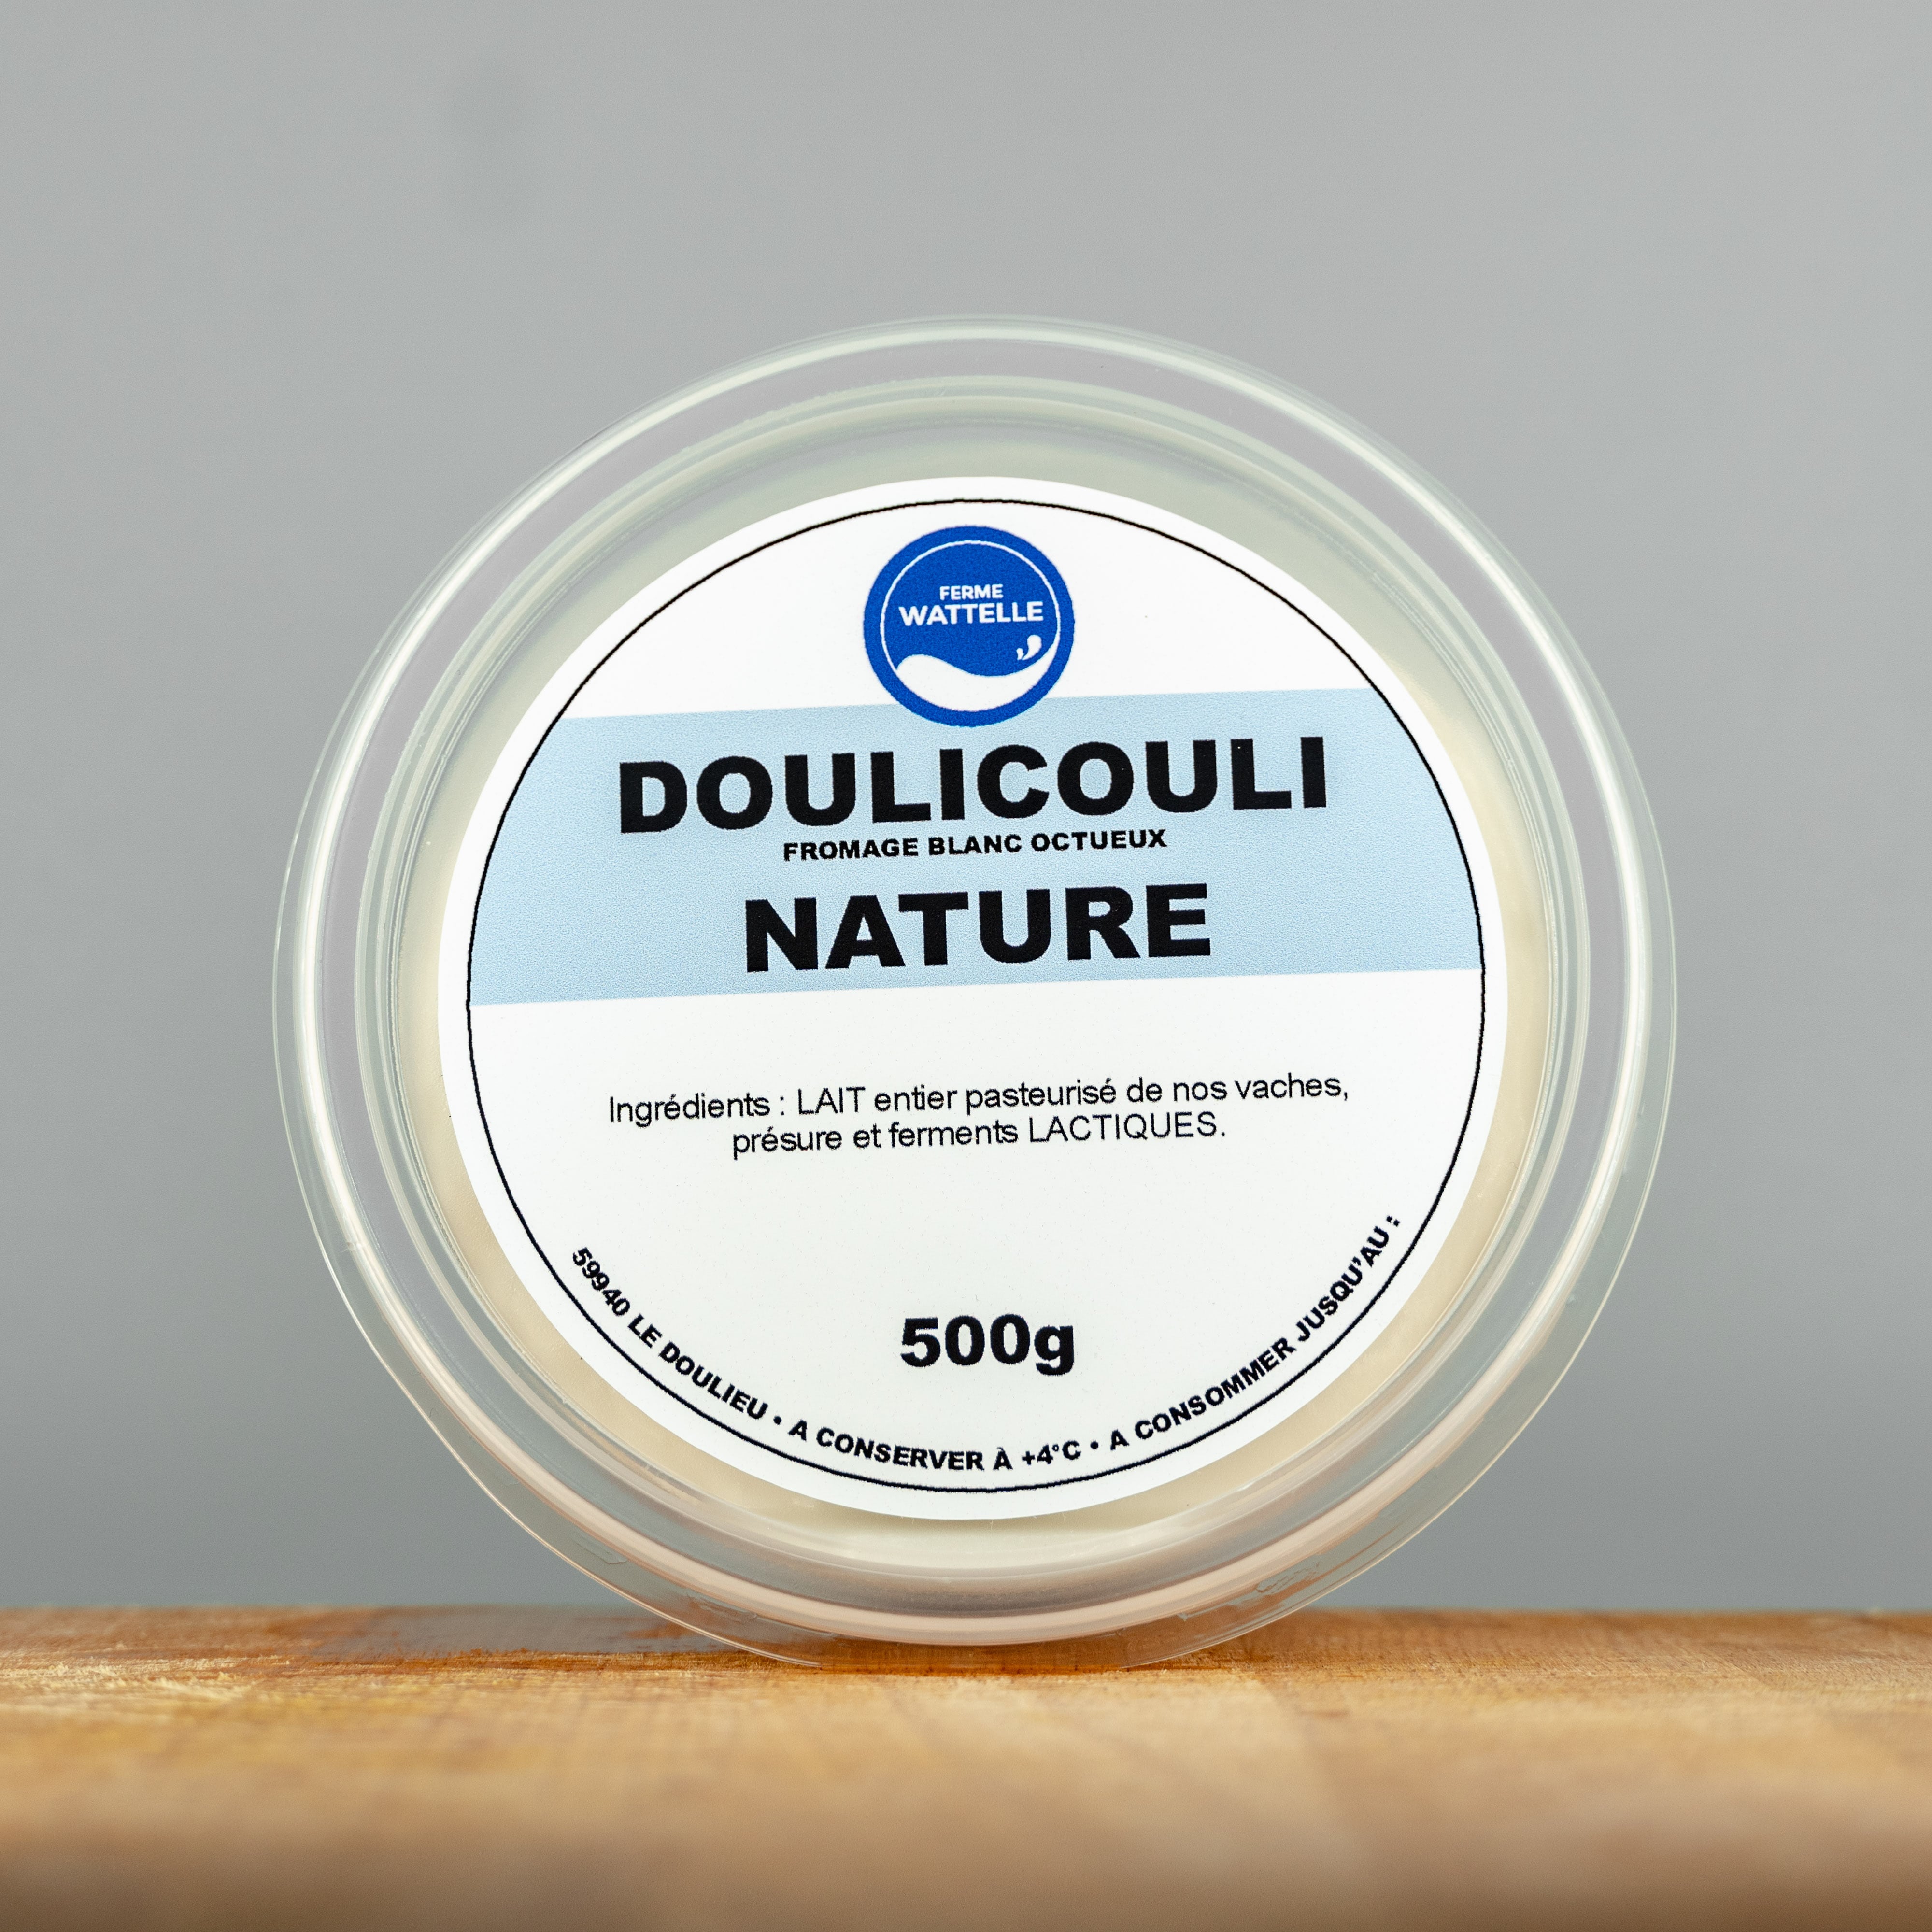 Doulicouli nature